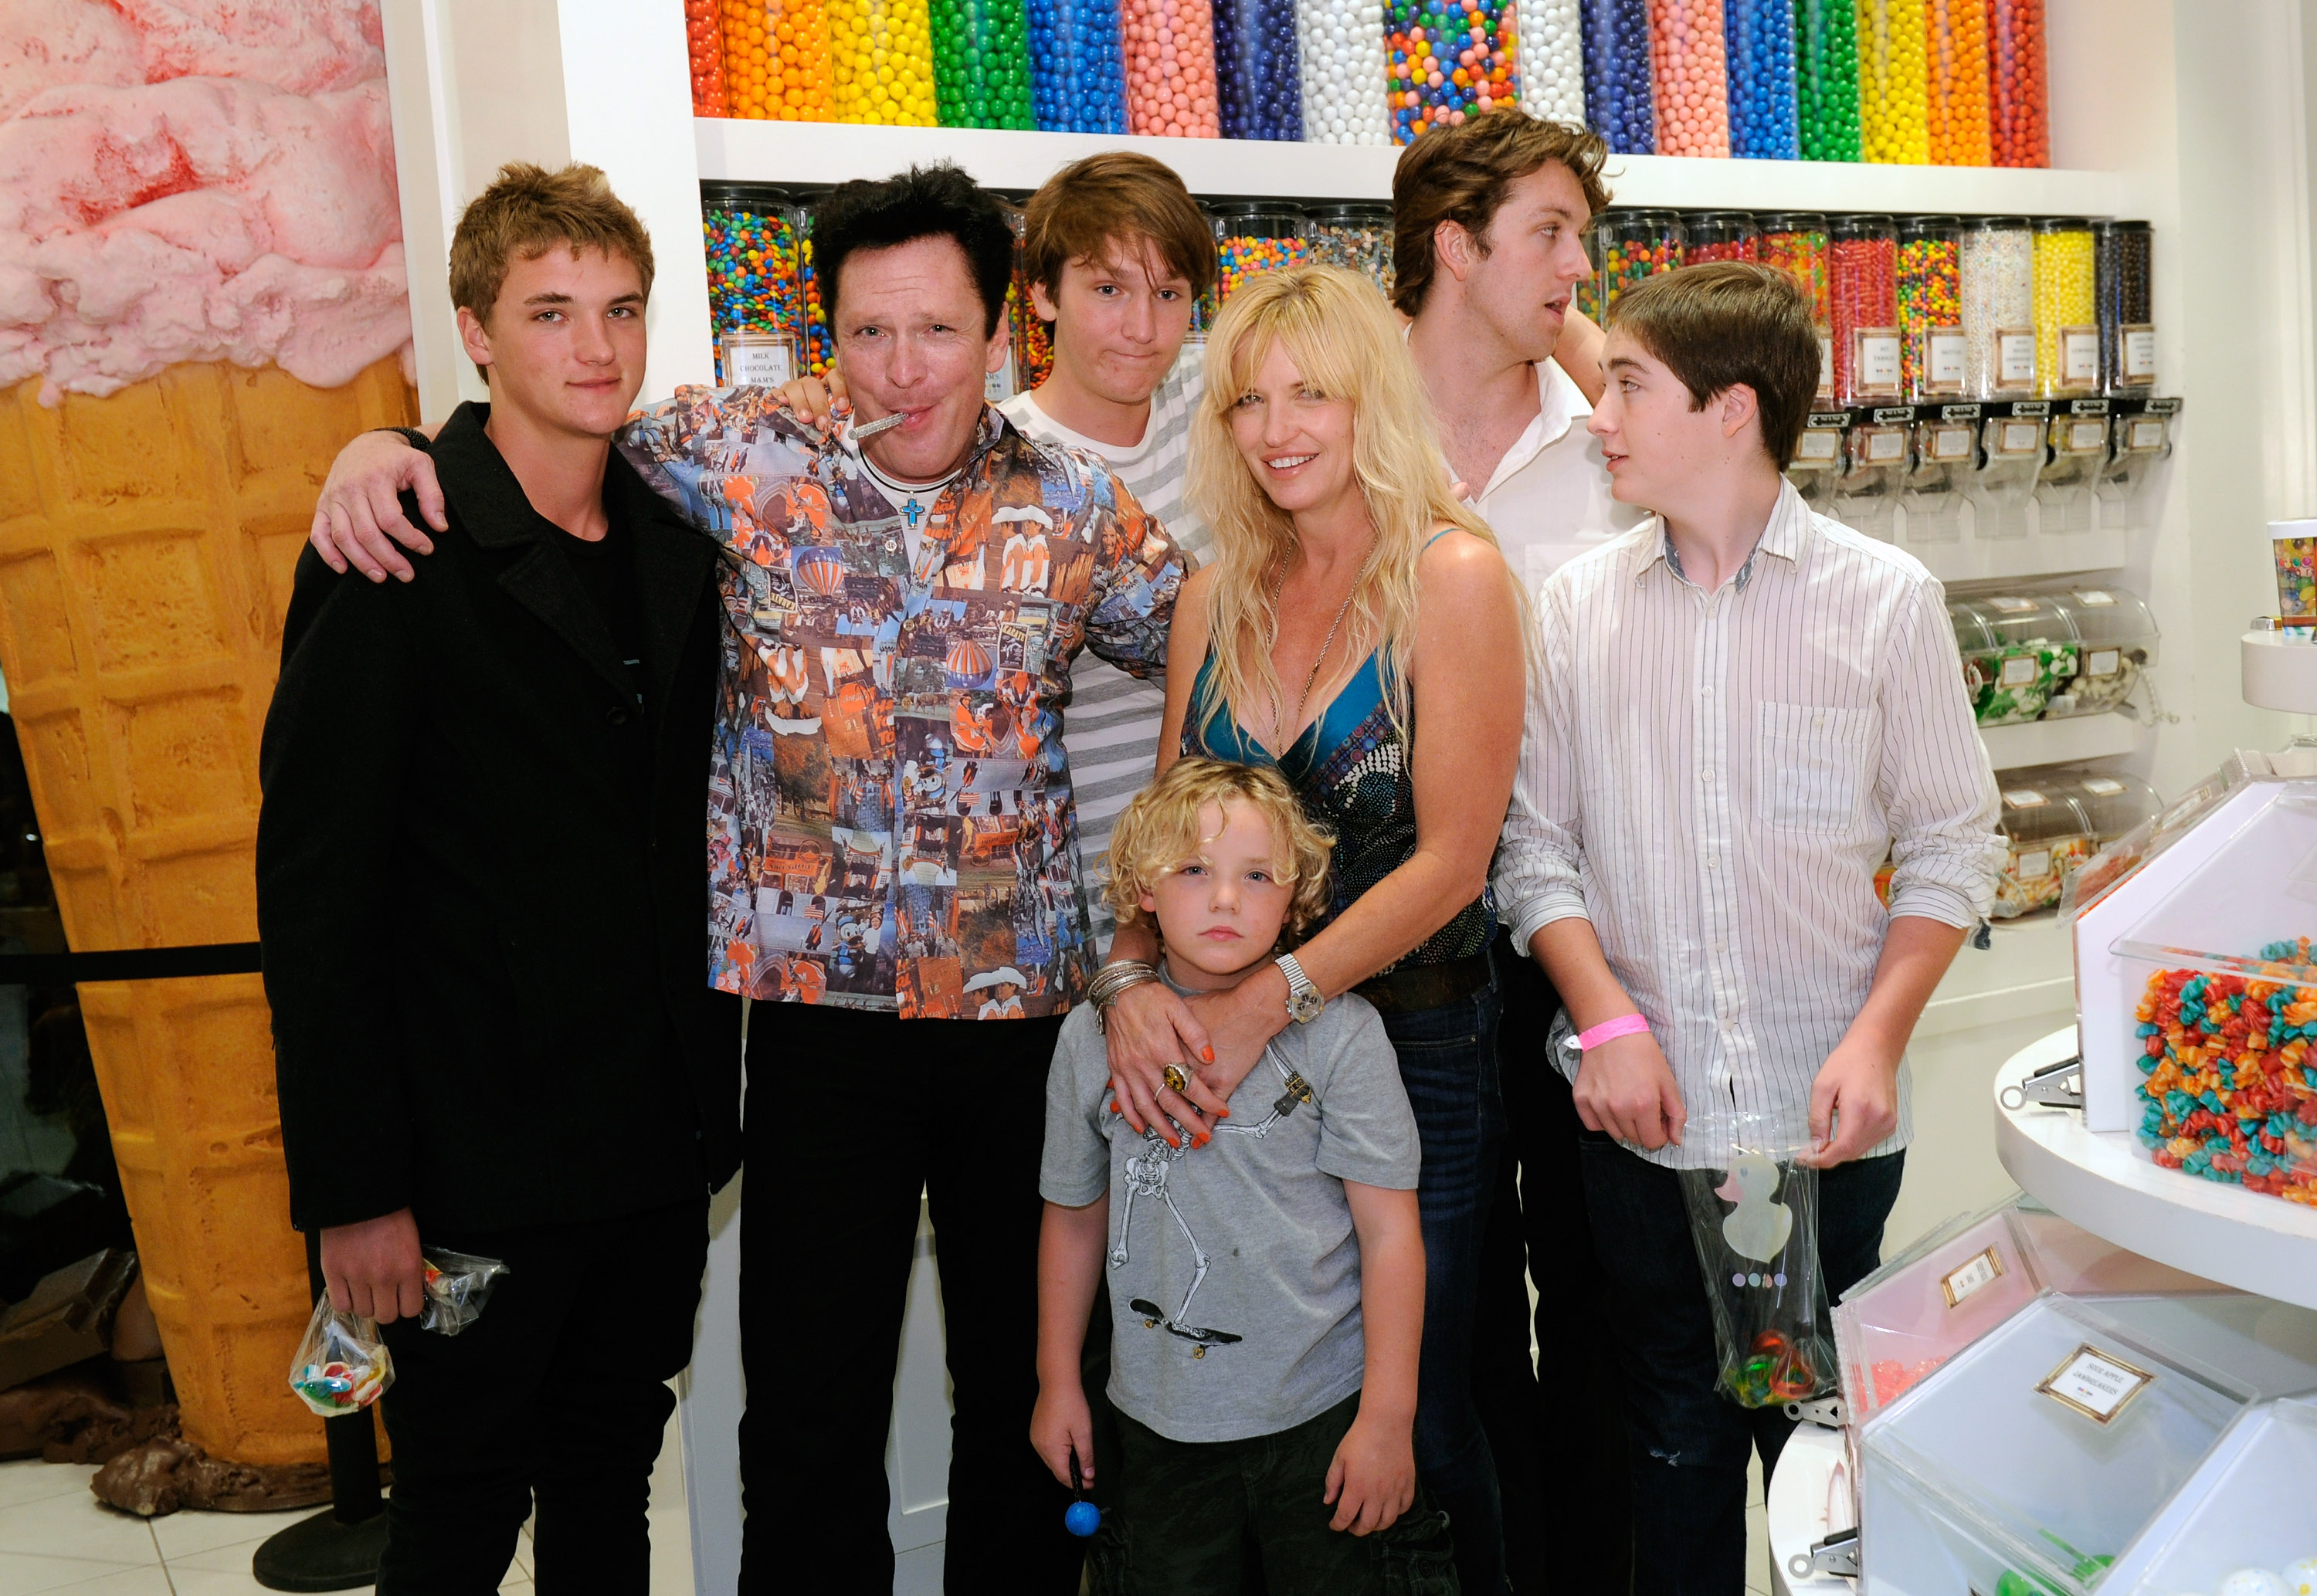 <p>"Reservoir Dogs" star Michael Madsen's son Hudson Madsen (seen on the left with his family in 2011) died by suicide on Jan. 23, 2022, the Department of the Medical Examiner in Honolulu, Hawaii, confirmed to <a href="https://www.eonline.com/news/1317449/michael-madsens-son-hudson-dead-at-26">E! News</a>. Hudson -- a soldier in the U.S. Army who'd spent time in Afghanistan and lived on Oahu with his wife of more than three years -- was 26. "We are heartbroken and overwhelmed with grief and pain at the loss of Hudson," Michael, wife DeAnna and their family told <a href="https://metro.co.uk/2022/01/25/hudson-madsen-dead-michael-madsen-heartbroken-as-son-dies-aged-26-15981405/">Metro.co.uk</a> in a statement. On Jan. 26, Michael opened up about the tragedy in a statement to the <a href="https://www.latimes.com/entertainment-arts/movies/story/2022-01-25/michael-madsen-son-dead-hudson-madsen">Los Angeles Times</a>. "I am in shock as my son, whom I just spoke with a few days ago, said he was happy — my last text from him was 'I love you dad,'" the grieving actor said. "I didn't see any signs of depression. It's so tragic and sad. I'm just trying to make sense of everything and understand what happened. He had typical life challenges that people have with finances, but he wanted a family. He was looking towards his future, so it's mind blowing. I just can't grasp what happened." Michael also revealed that he's asked for a full investigation by the military, explaining he believes "that officers and rank and file were shaming" Hudson -- who's the godson of filmmaker Quentin Tarantino -- for needing therapy, which made him back off on seeking help for mental health issues.</p>